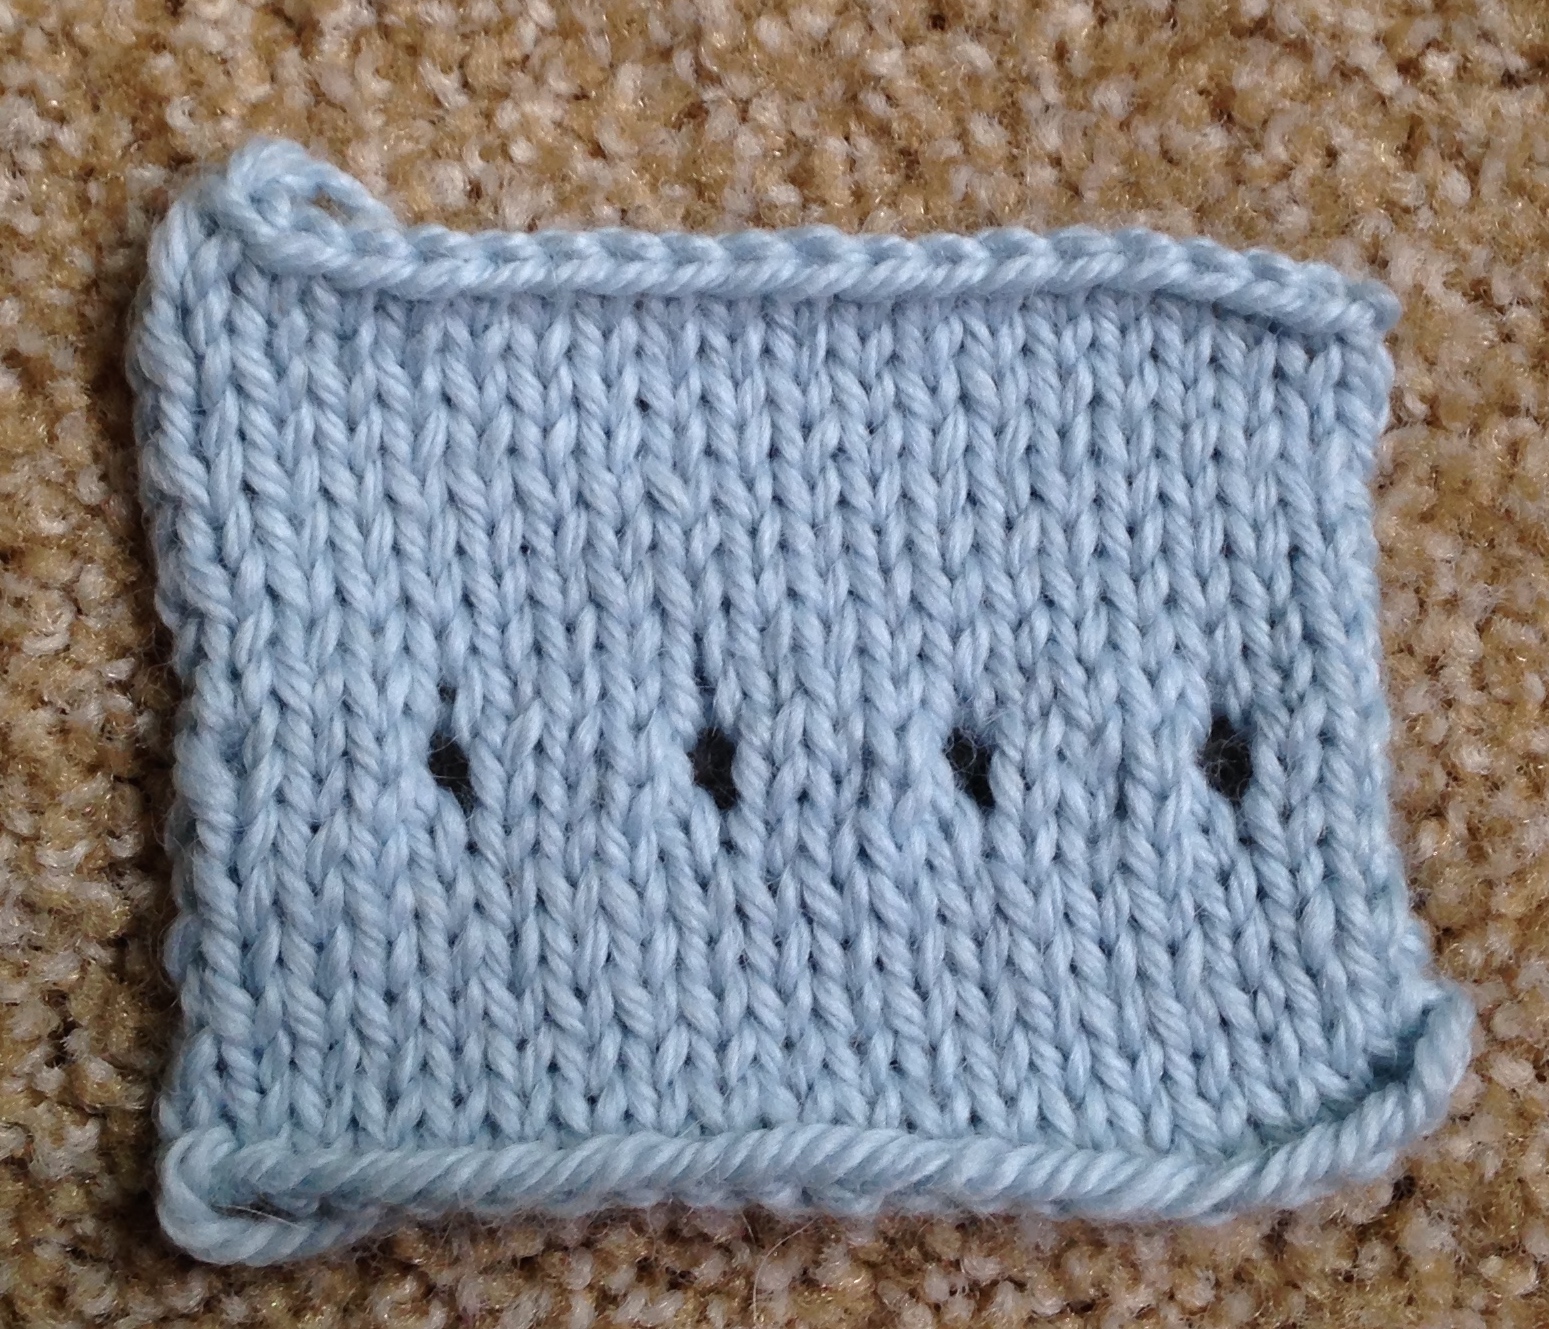 Swatch of knitting